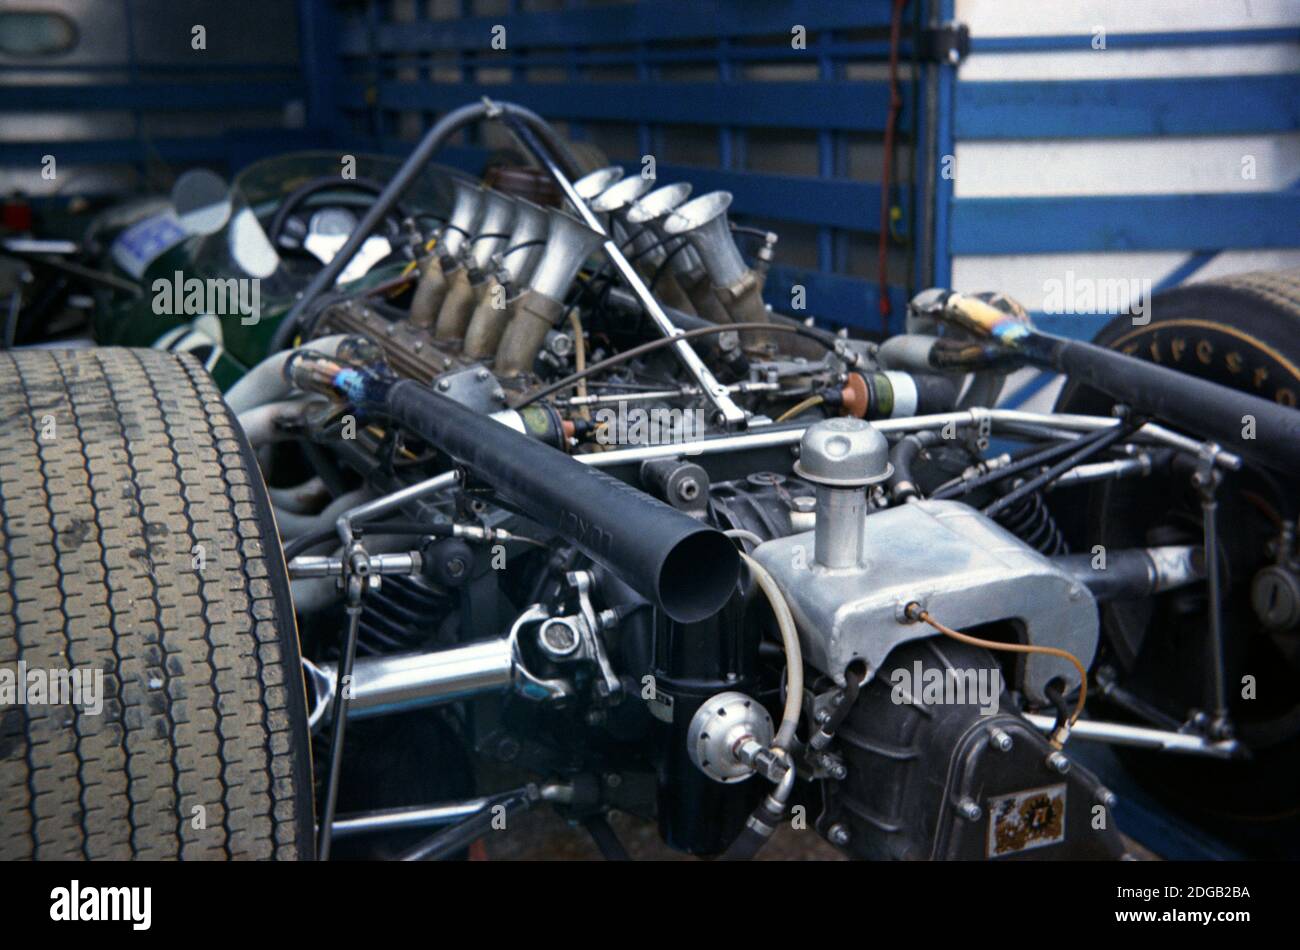 Mechanical detail of Guy Ligier's Brabham-Repco V8 Formula 1 car in the Paddock at Silverstone for 1967 British Grand Prix Practise day, 14th July Stock Photo